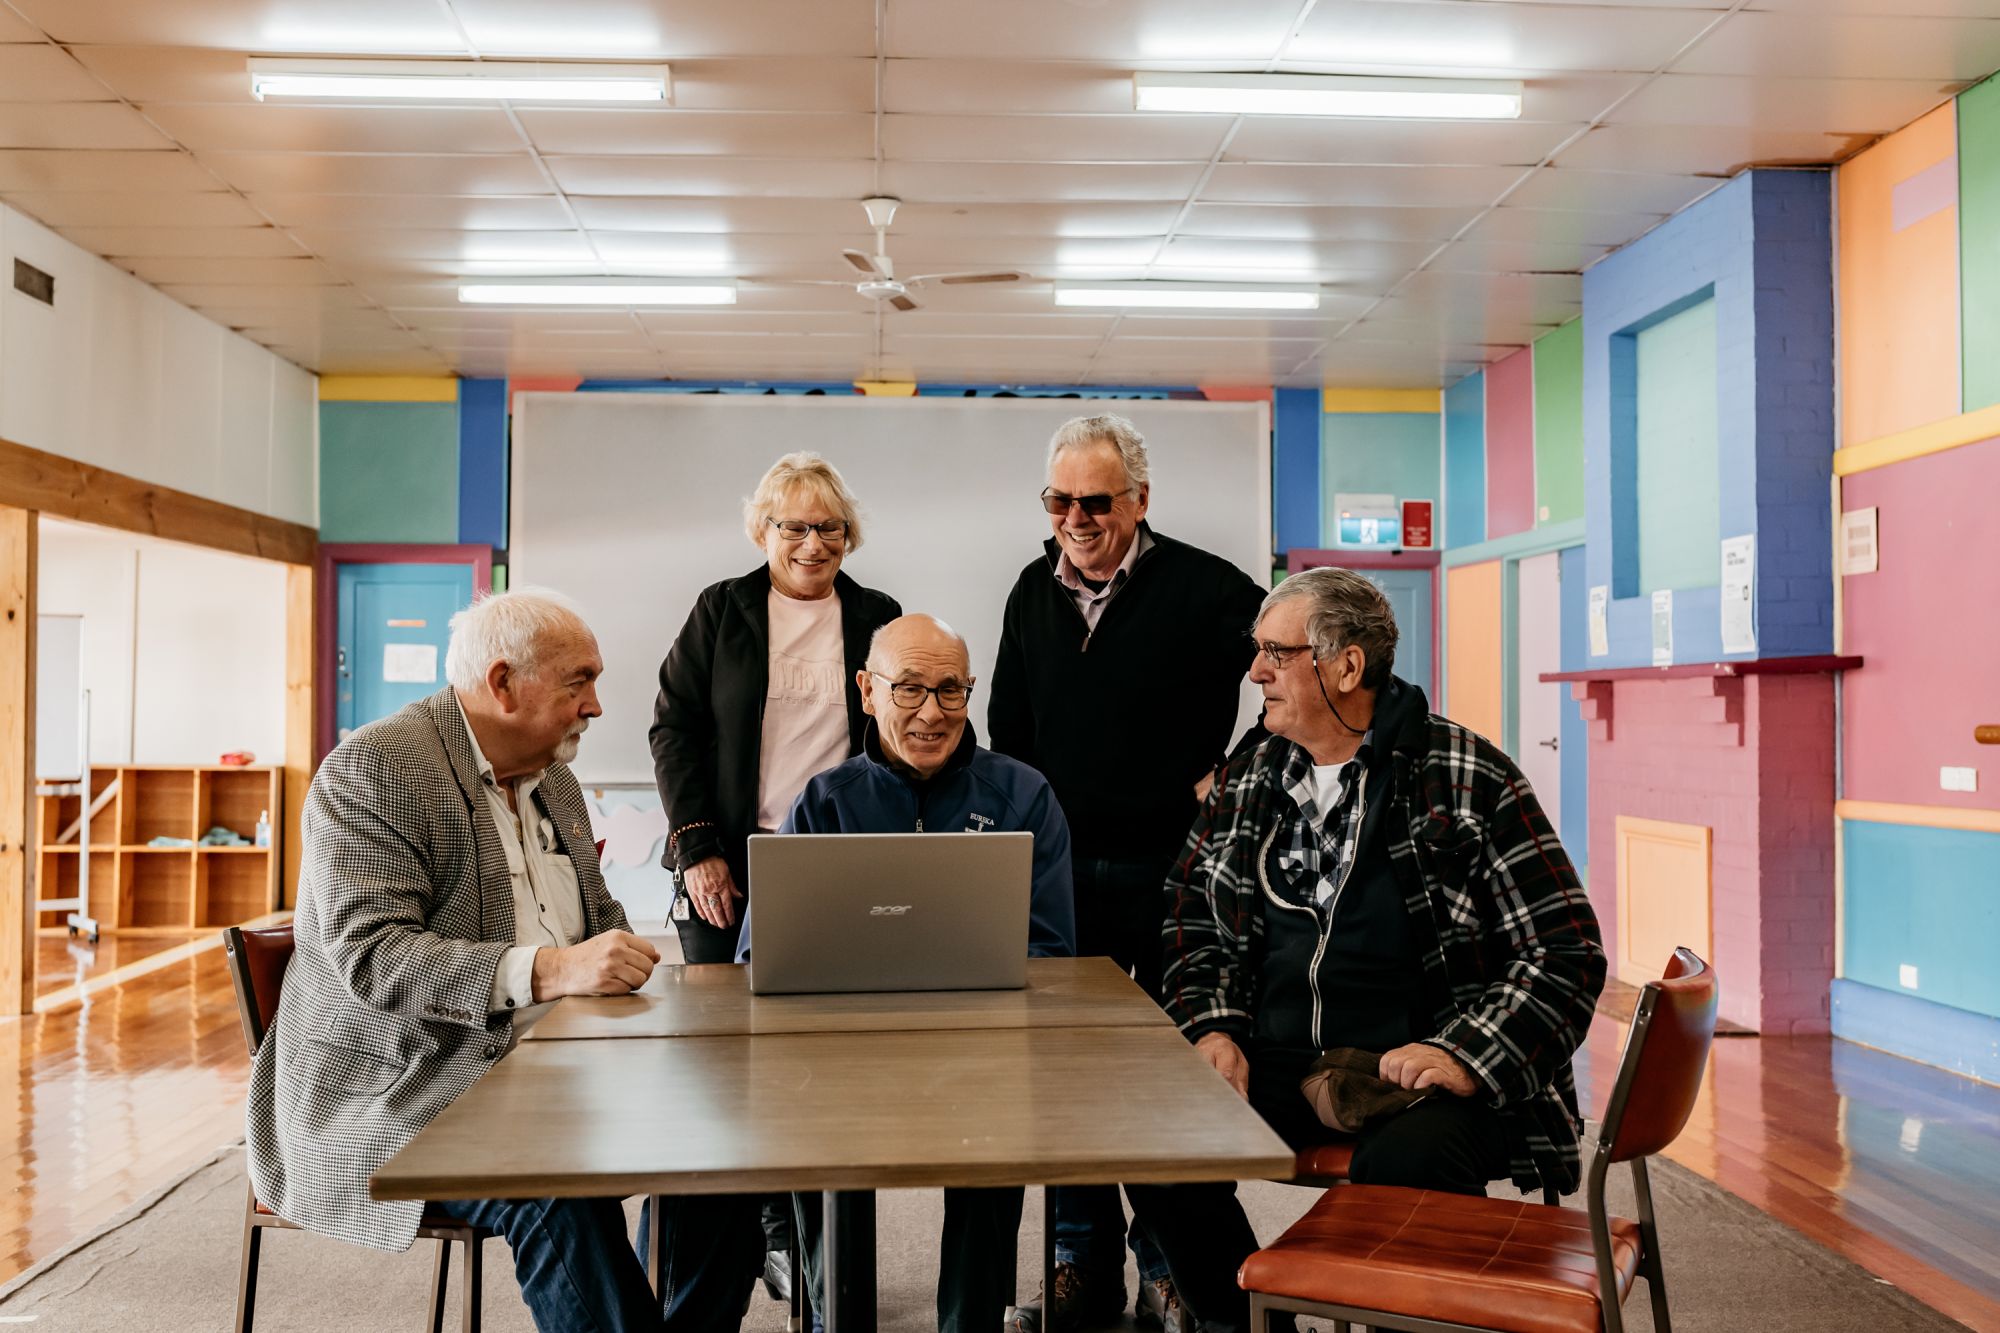 Group of community members around a computer